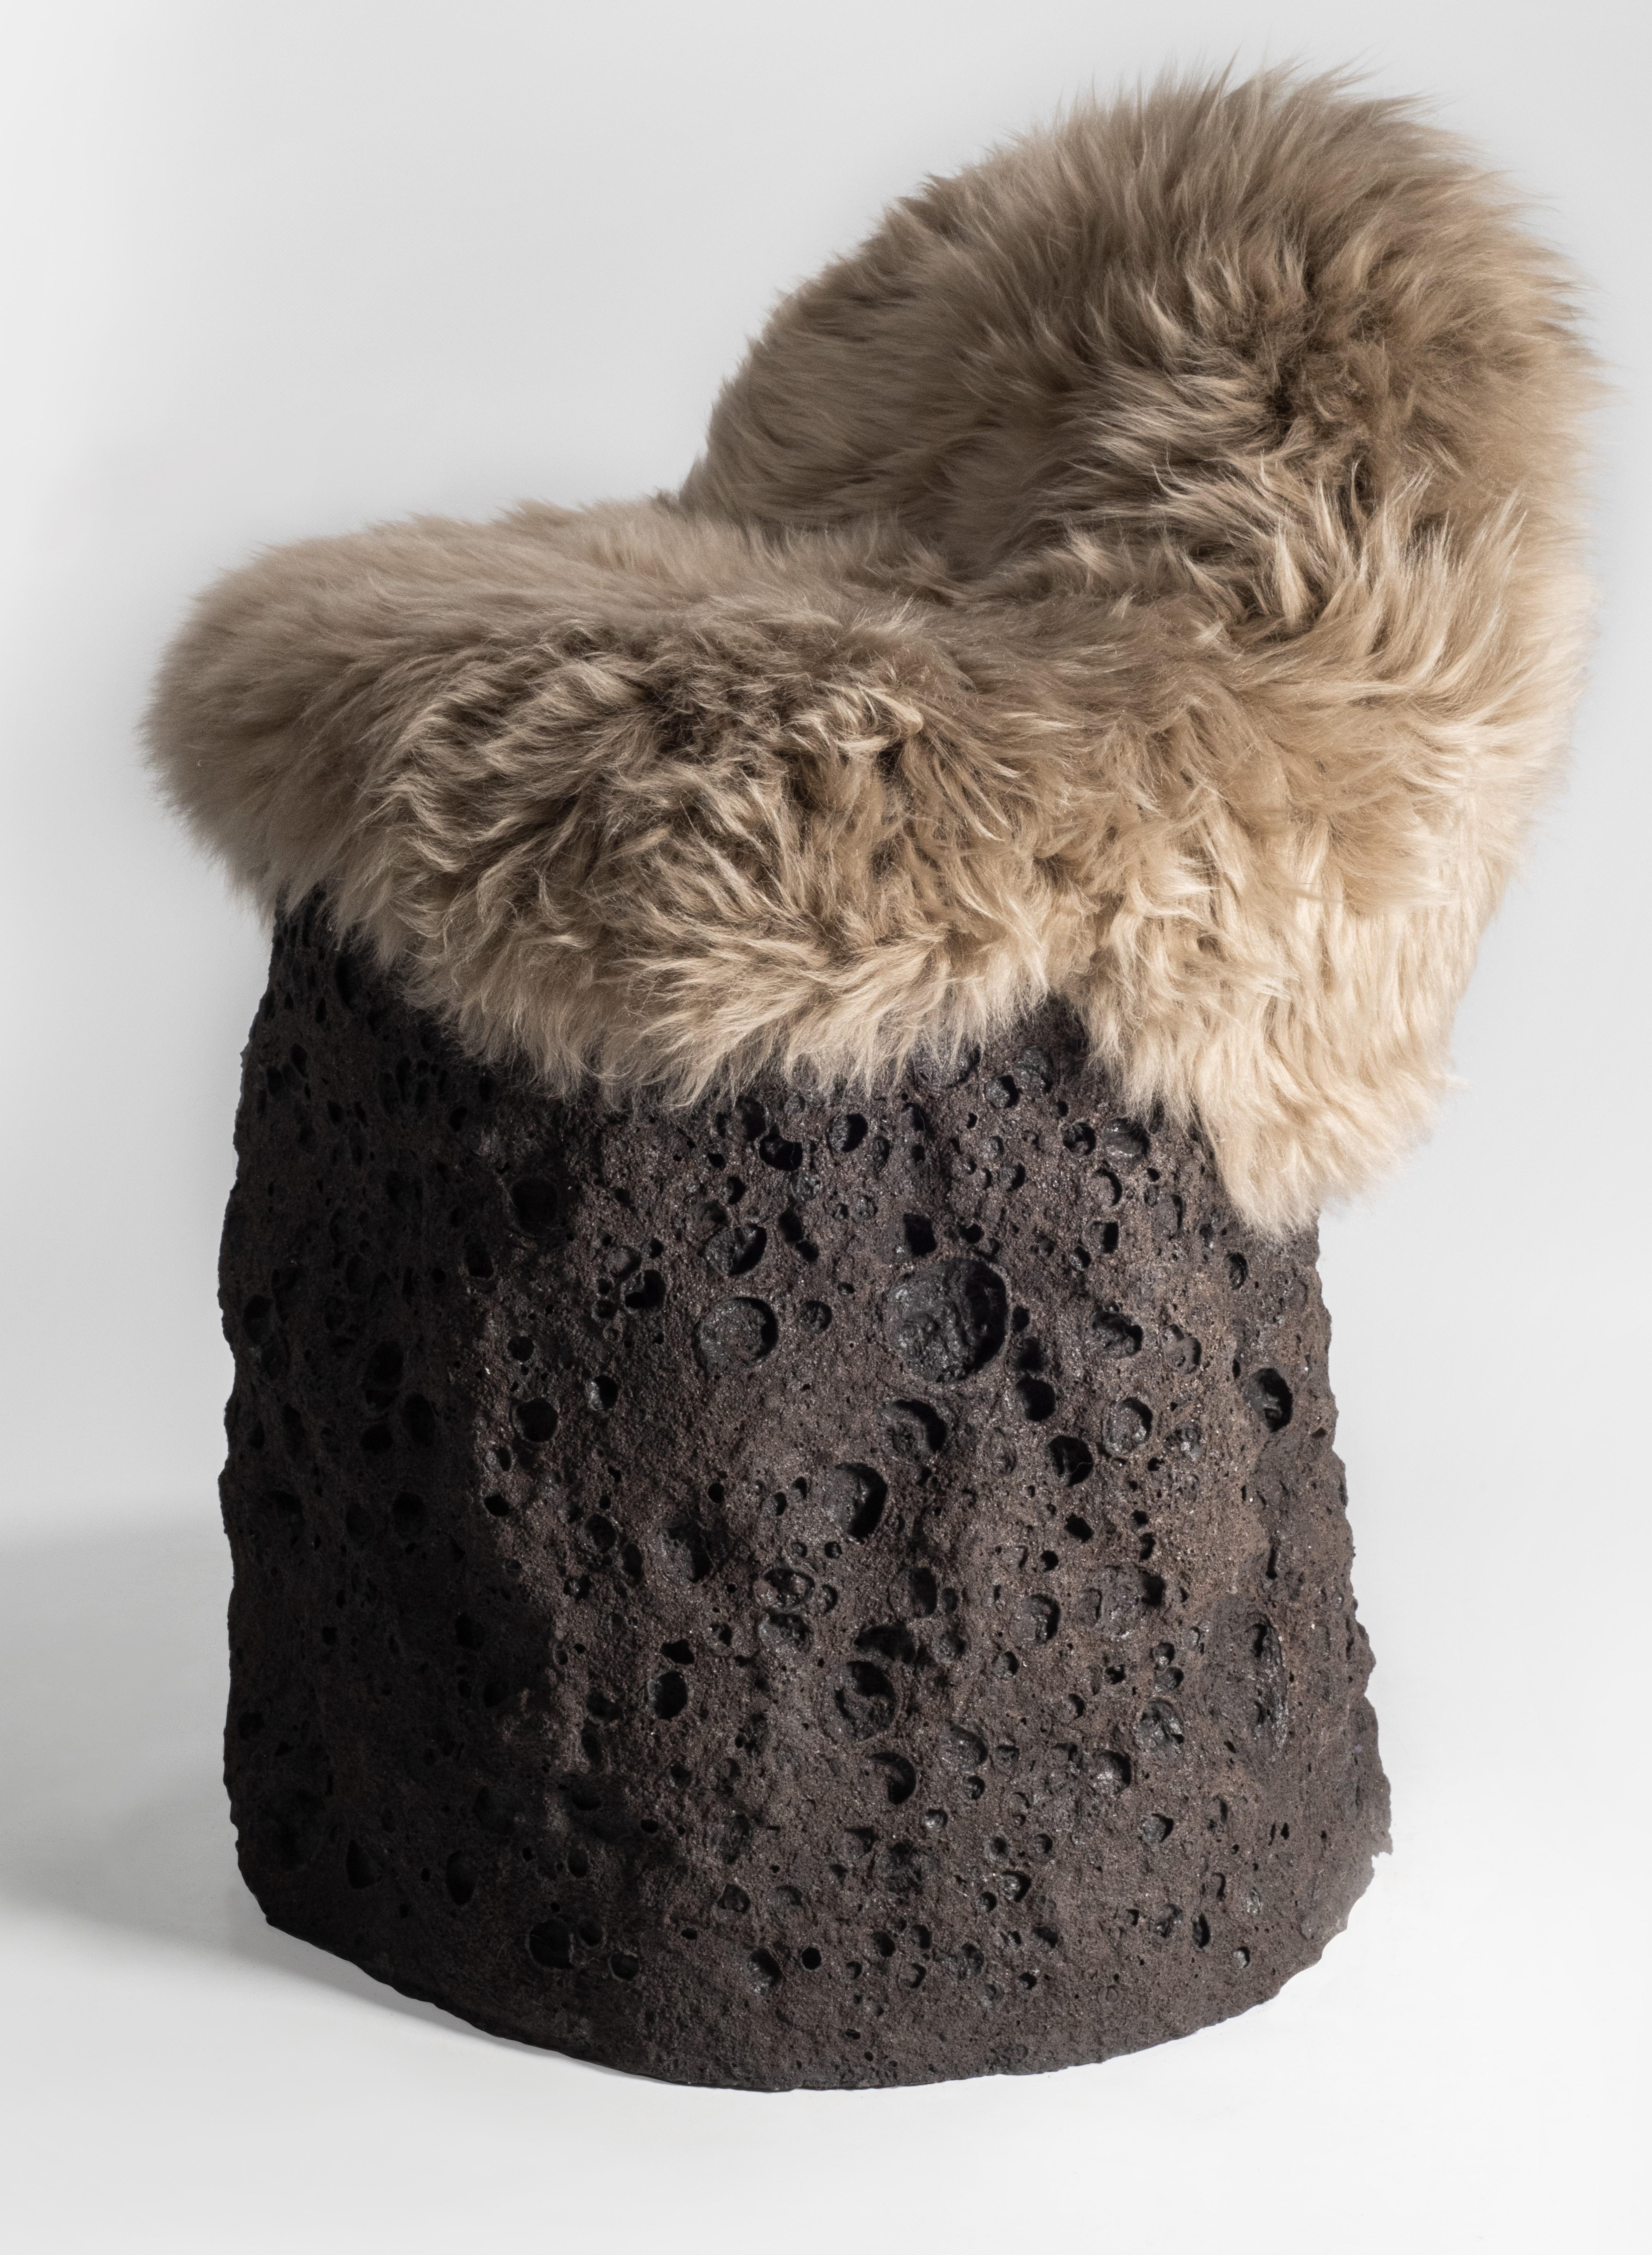 Geoprimitive ceramic settle with sheep wool by Niclas Wolf
Unique piece, numbered
Materials: ceramic 
Dimensions: Ø55 x H 65 cm
Weight: 49 kg

Certificates are issued for all pieces.

Geoprimitive_ is a design series that compares and